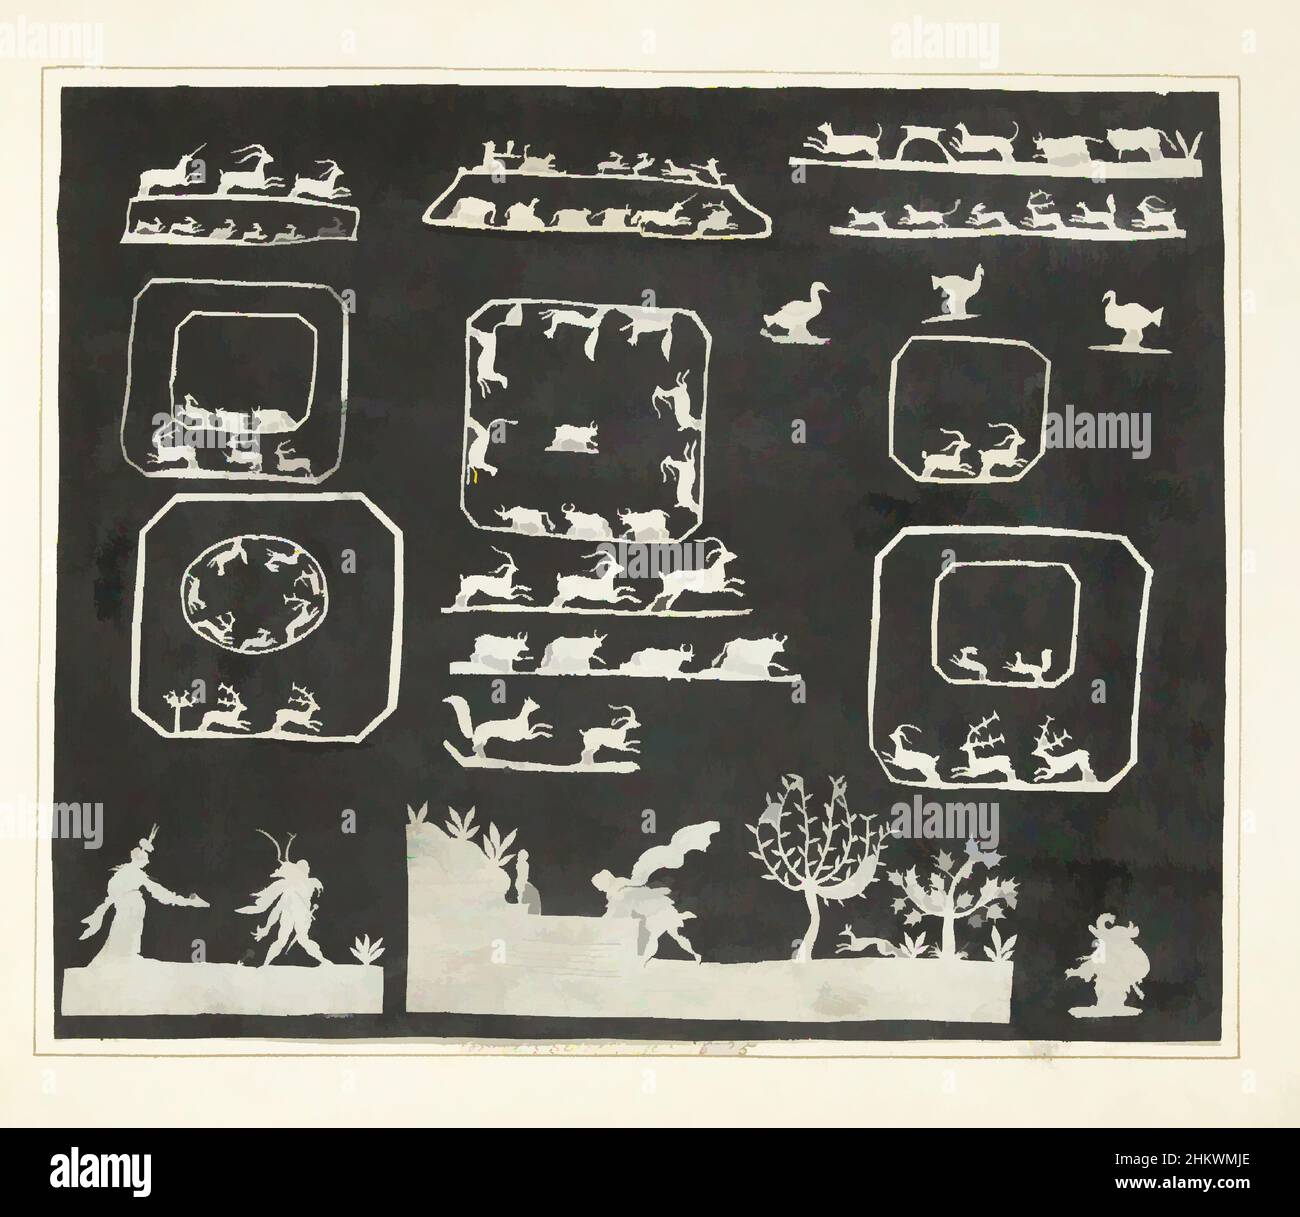 Art inspired by Running animals, figures and Narcissus, Gesina ter Borch and her nephews Cornelis and Gerrit Schellinger (probably 13 and 14 years old) have several clippings in white pasted on a black paper. At the top are mainly running animals, at the bottom center a representation, Classic works modernized by Artotop with a splash of modernity. Shapes, color and value, eye-catching visual impact on art. Emotions through freedom of artworks in a contemporary way. A timeless message pursuing a wildly creative new direction. Artists turning to the digital medium and creating the Artotop NFT Stock Photo